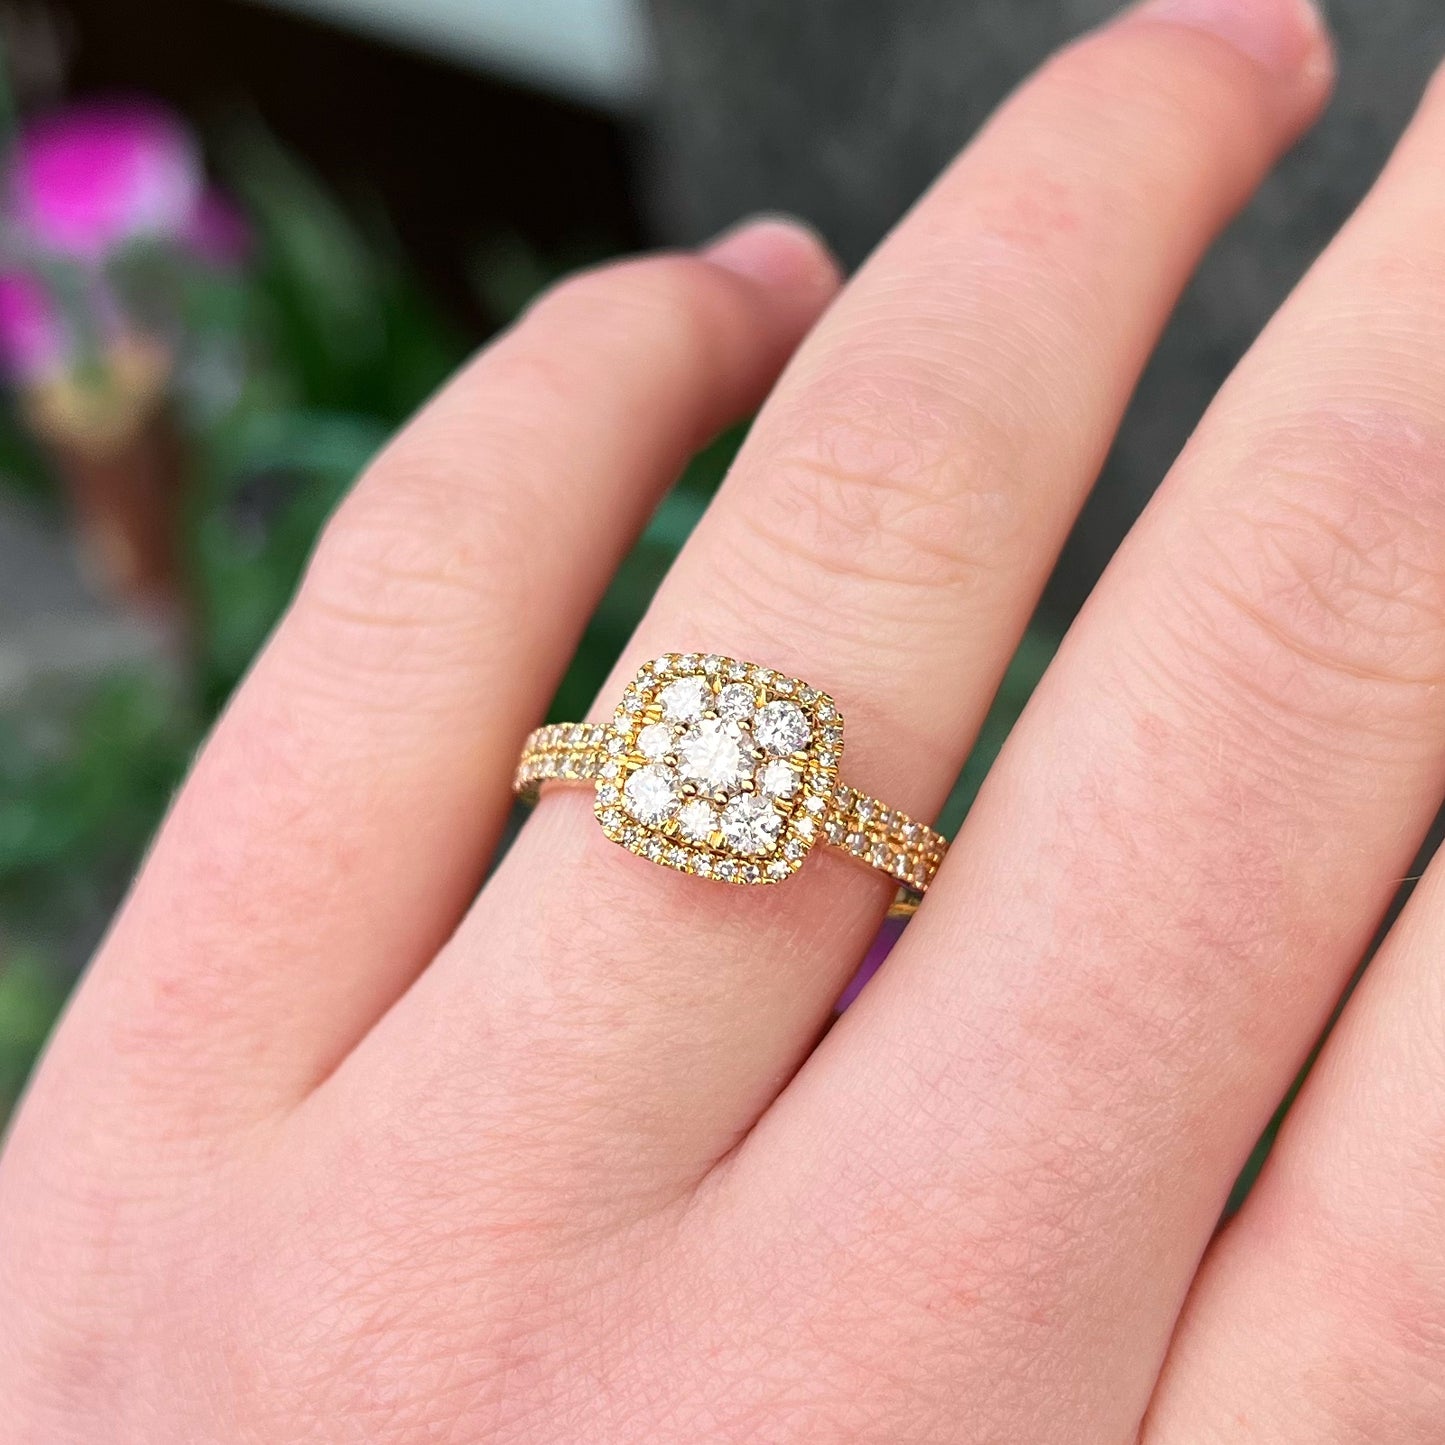 Vintage 18ct Yellow Gold Diamond Cluster Ring - Size R1/2